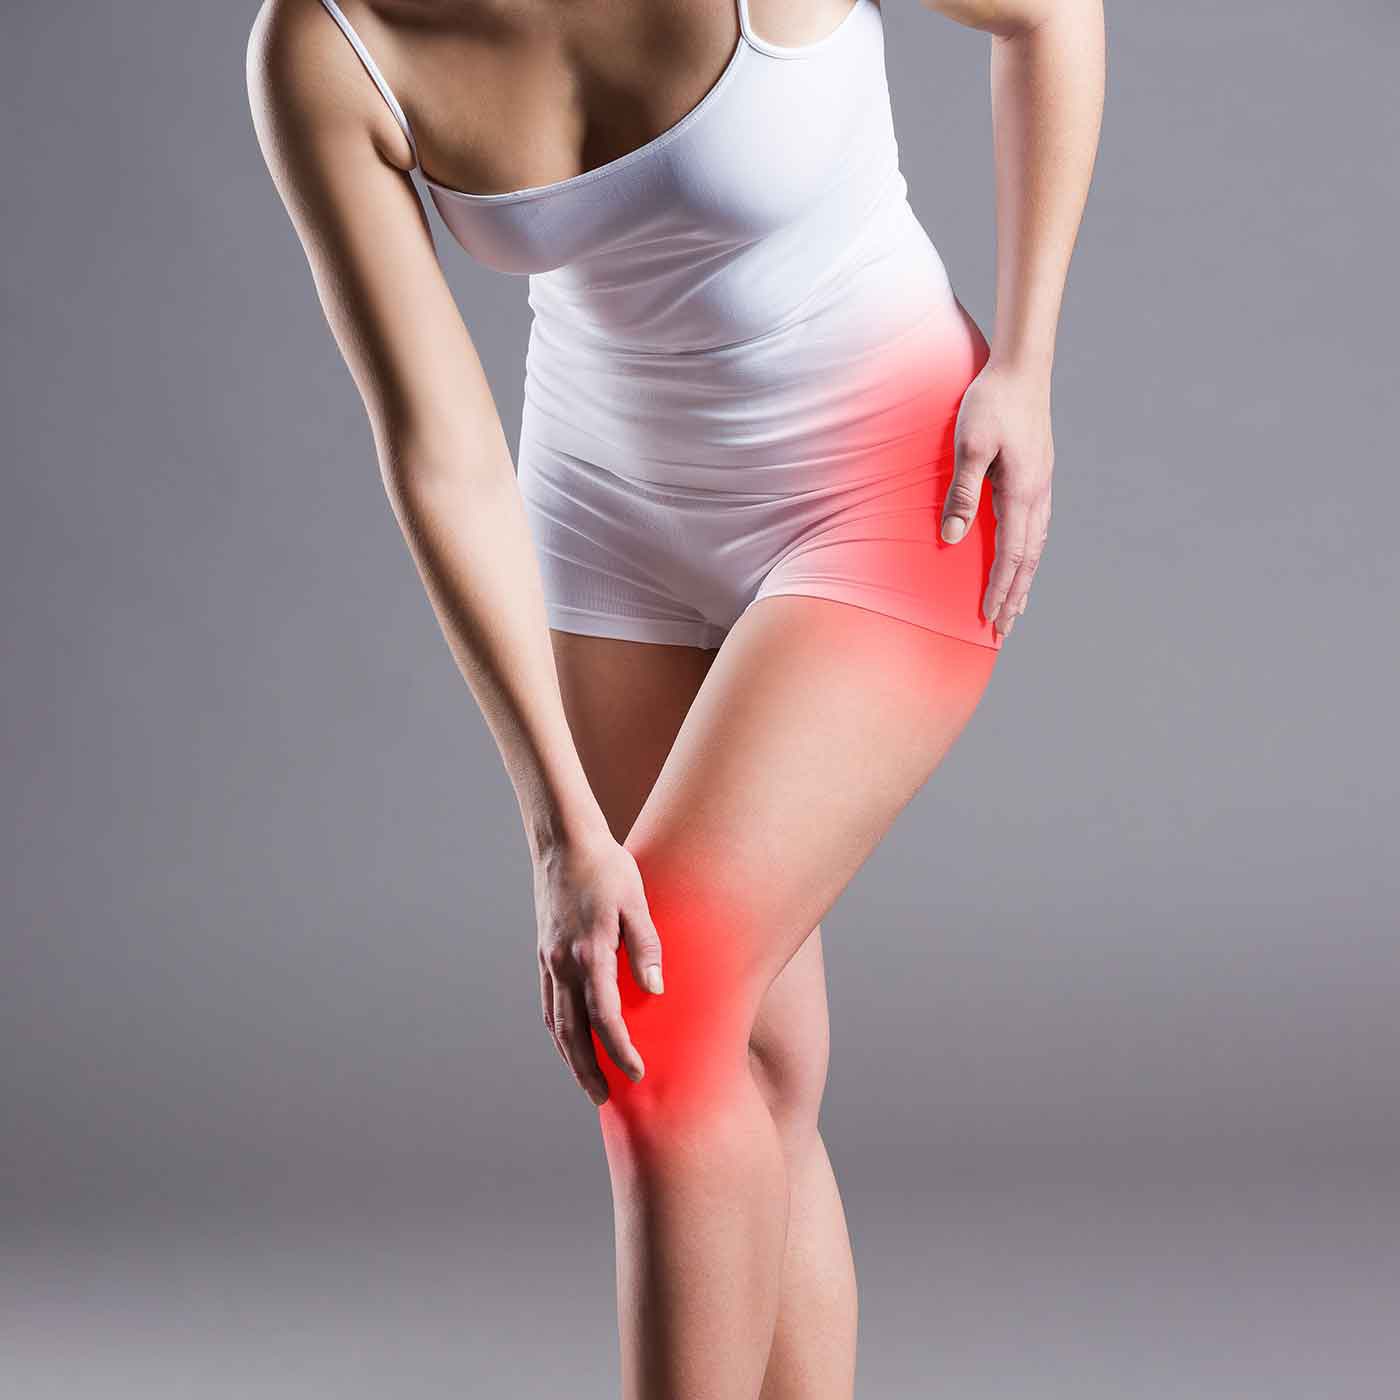 5 Signs it’s Time to Talk to Your Doctor About Joint Replacement Surgery